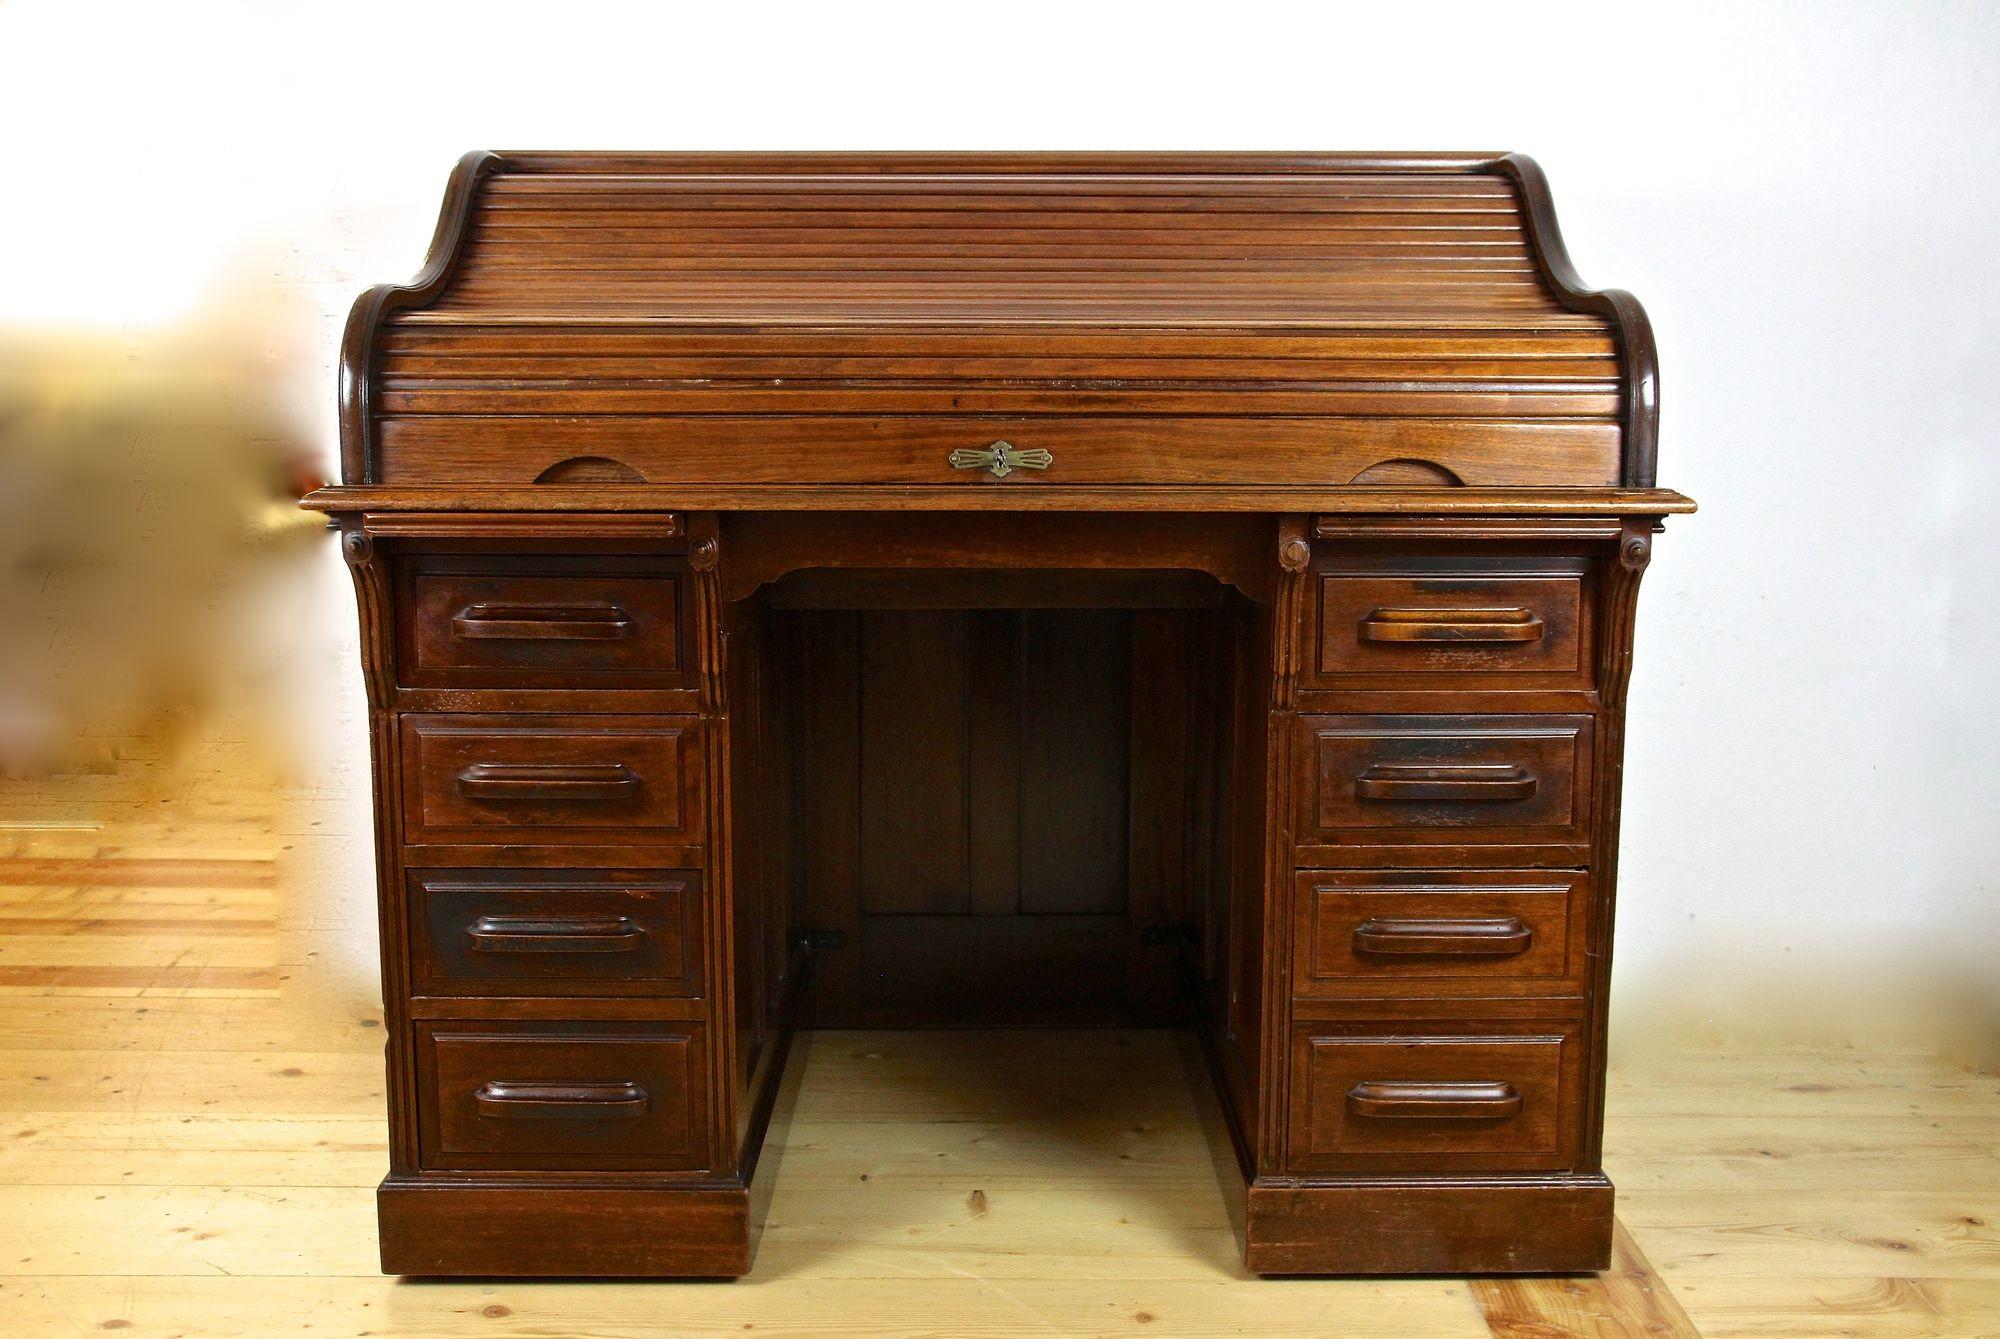 Beautiful mahogany roll top writing desk from the period around 1920 in England. An impressive example of an early 20th century knee hole desk which has been elaborately crafted by showing fine mahogany veneered surfaces. This fantastic office desk